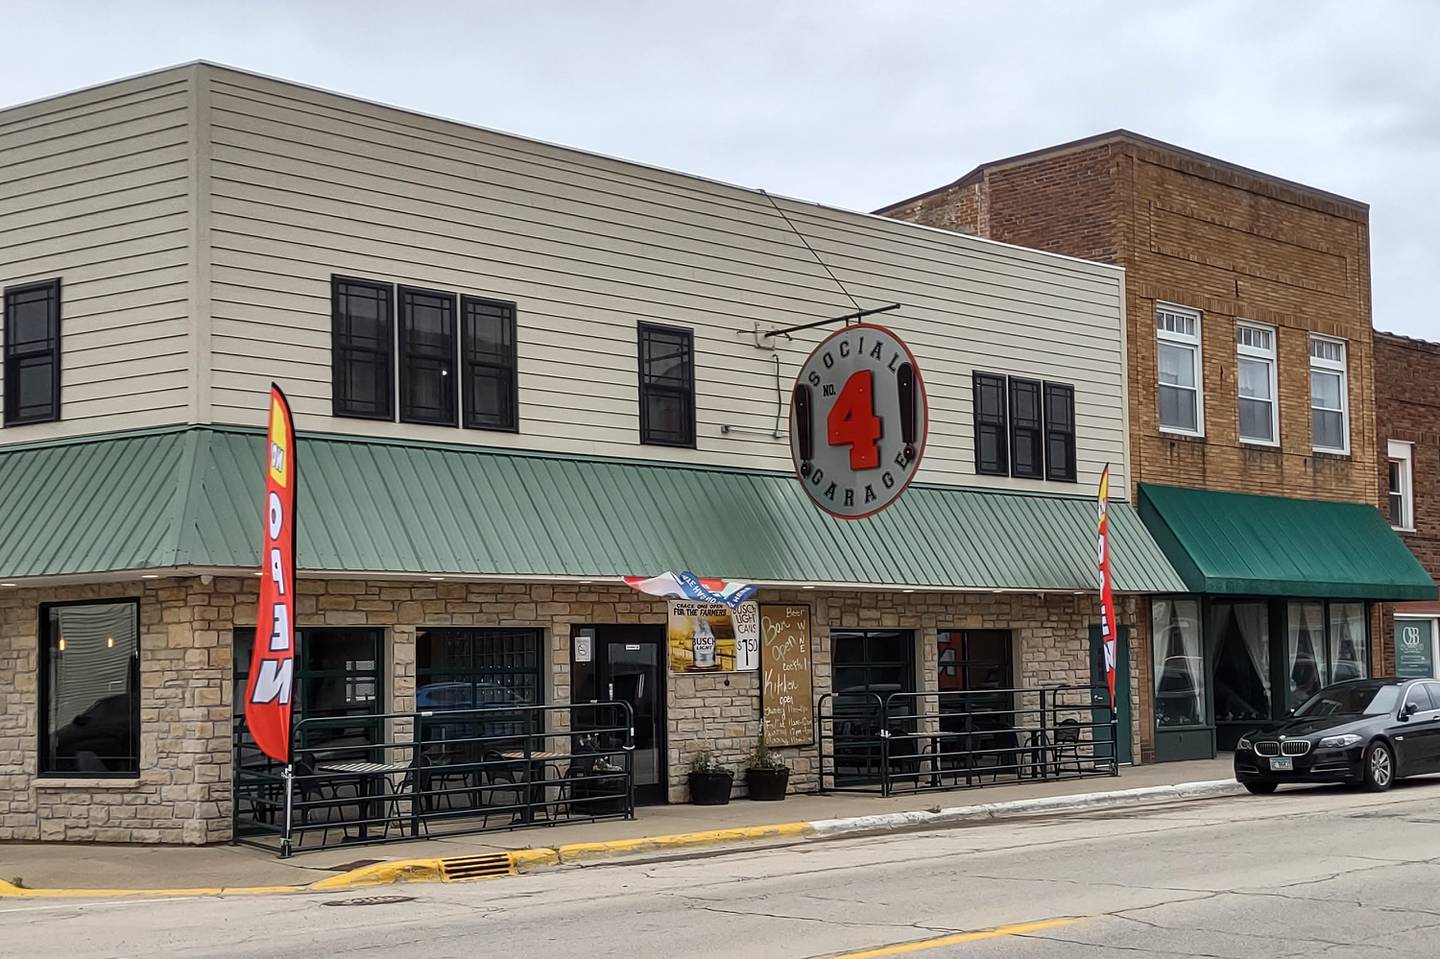 No. 4 Social Garage in downtown Seneca reopened in May after a temporary closure earlier this year. The bar and grill specializes in pizza, sandwiches and burgers, among other items.